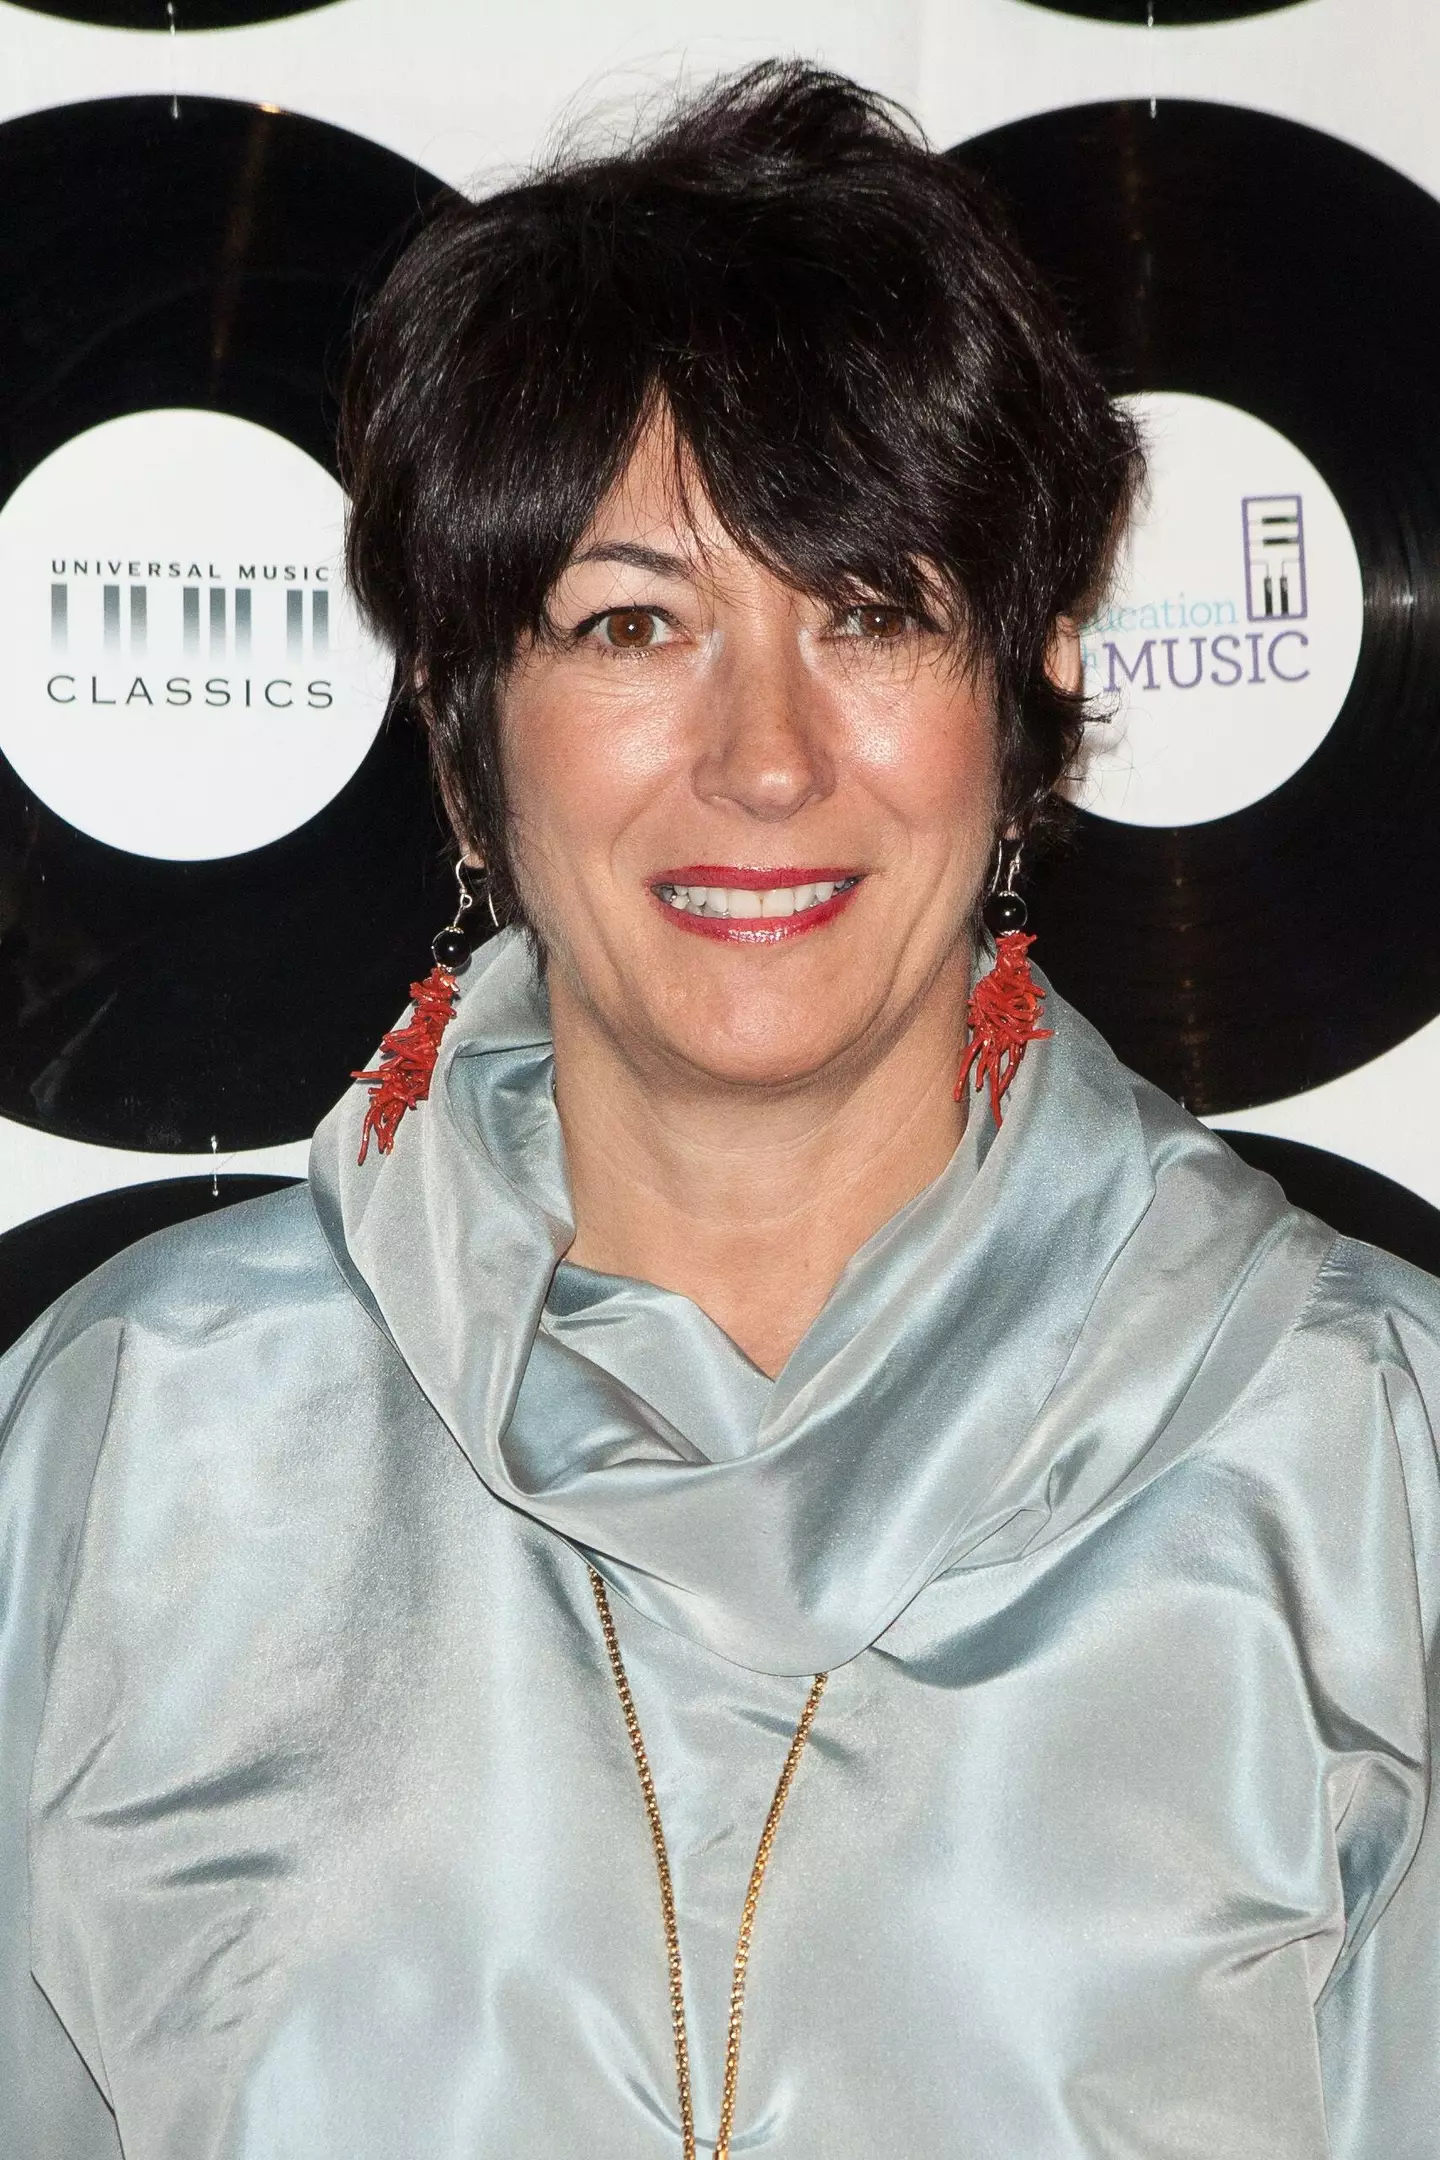 Ghislaine Maxwell at a Children's Benefit Gala in 2014.